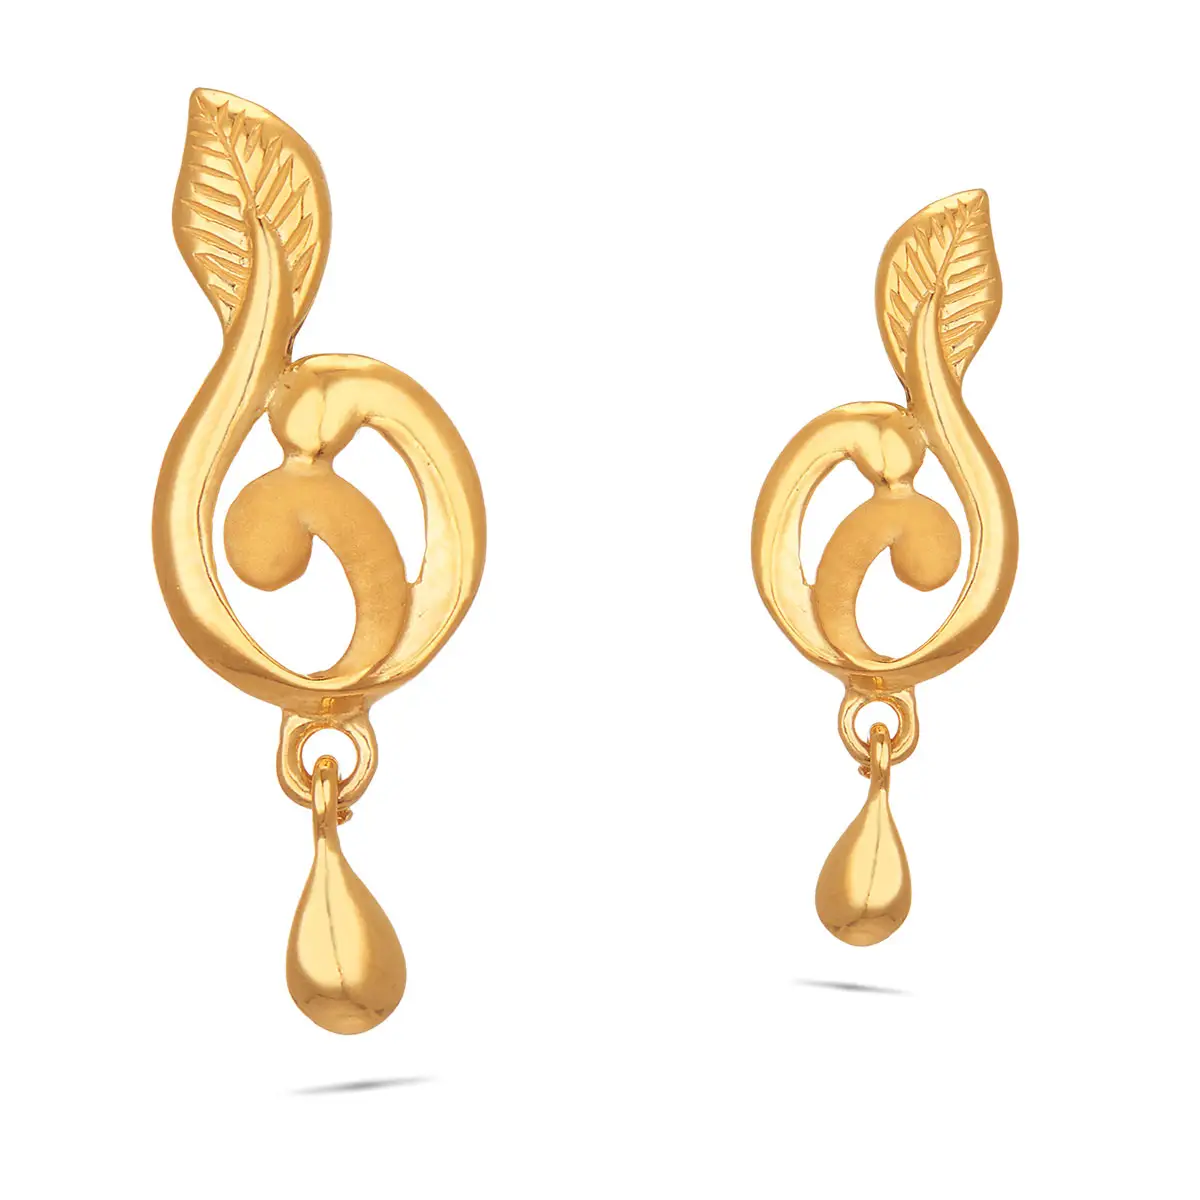 Trending 18 K solid Gold Earrings with Stunning Classic designs for Party engagements and marriage